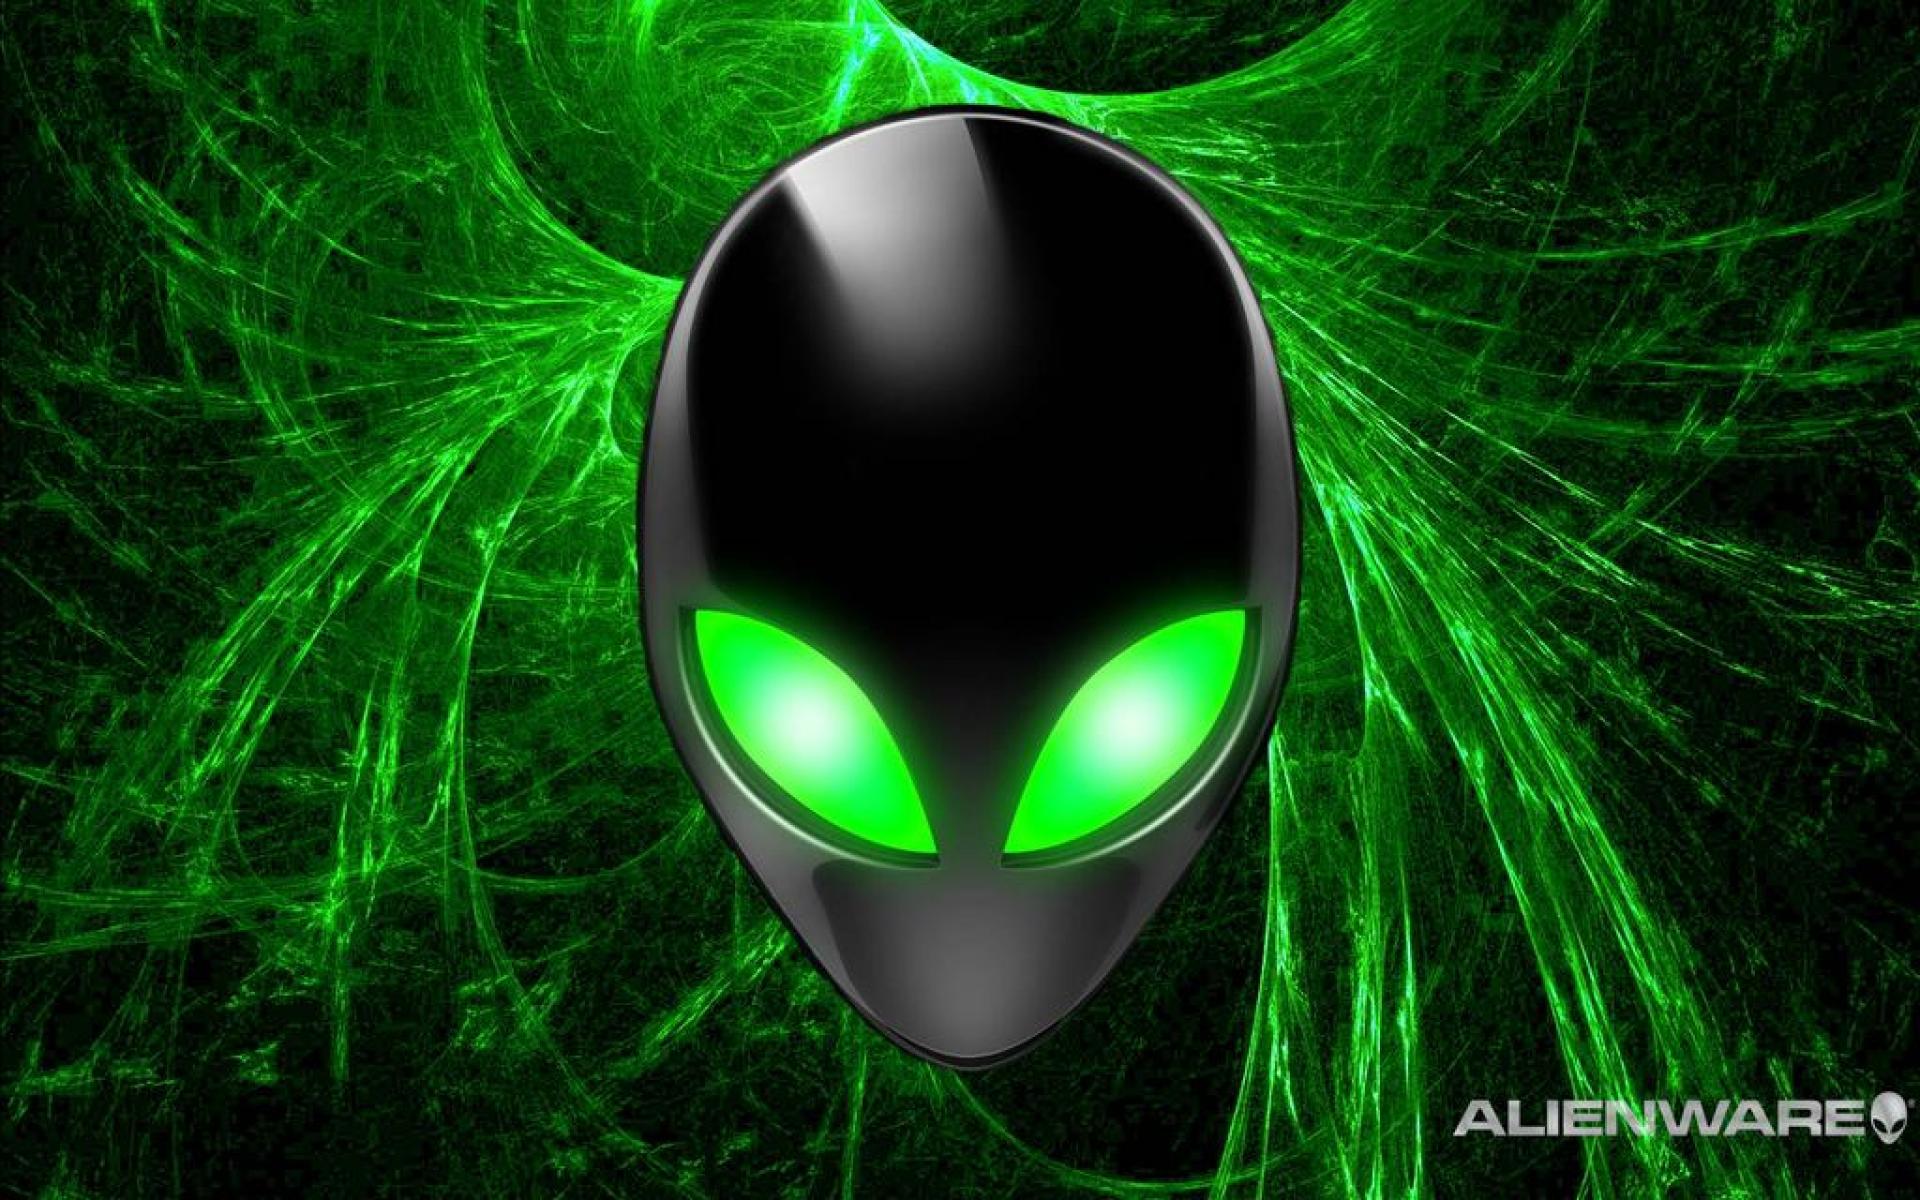 Alienware wallpaper - High Quality and Resolution